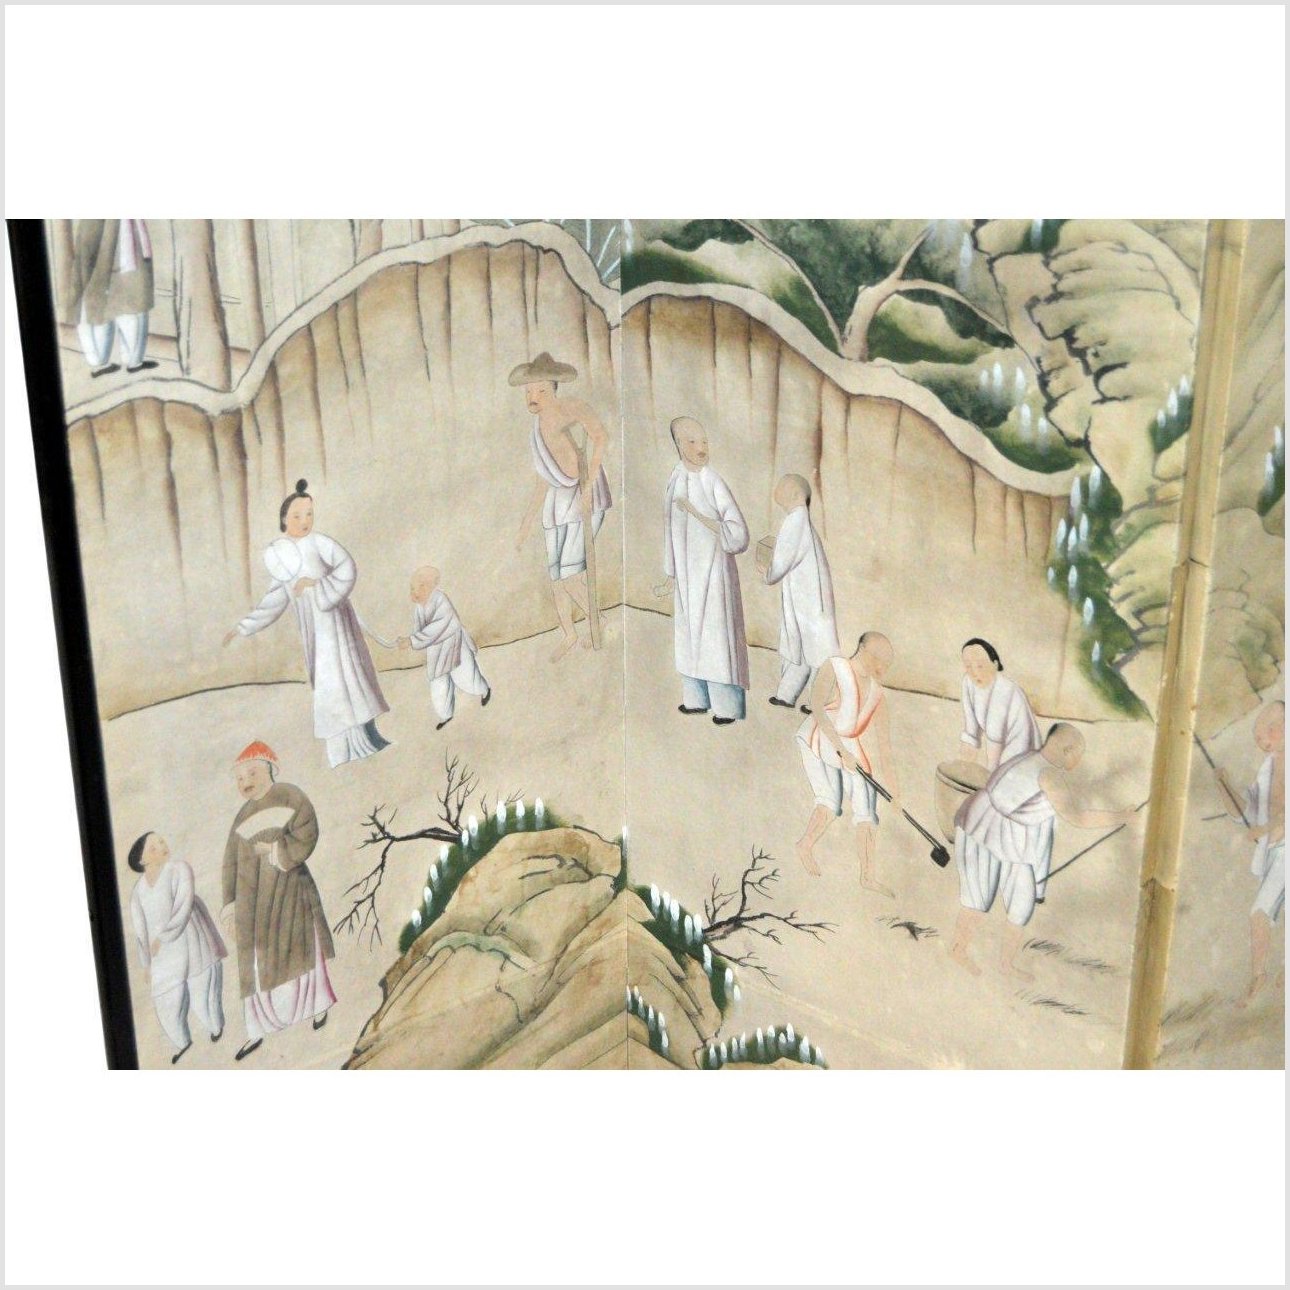 4-Panel Shan Shui Inspired Screen-YN2865-6. Asian & Chinese Furniture, Art, Antiques, Vintage Home Décor for sale at FEA Home